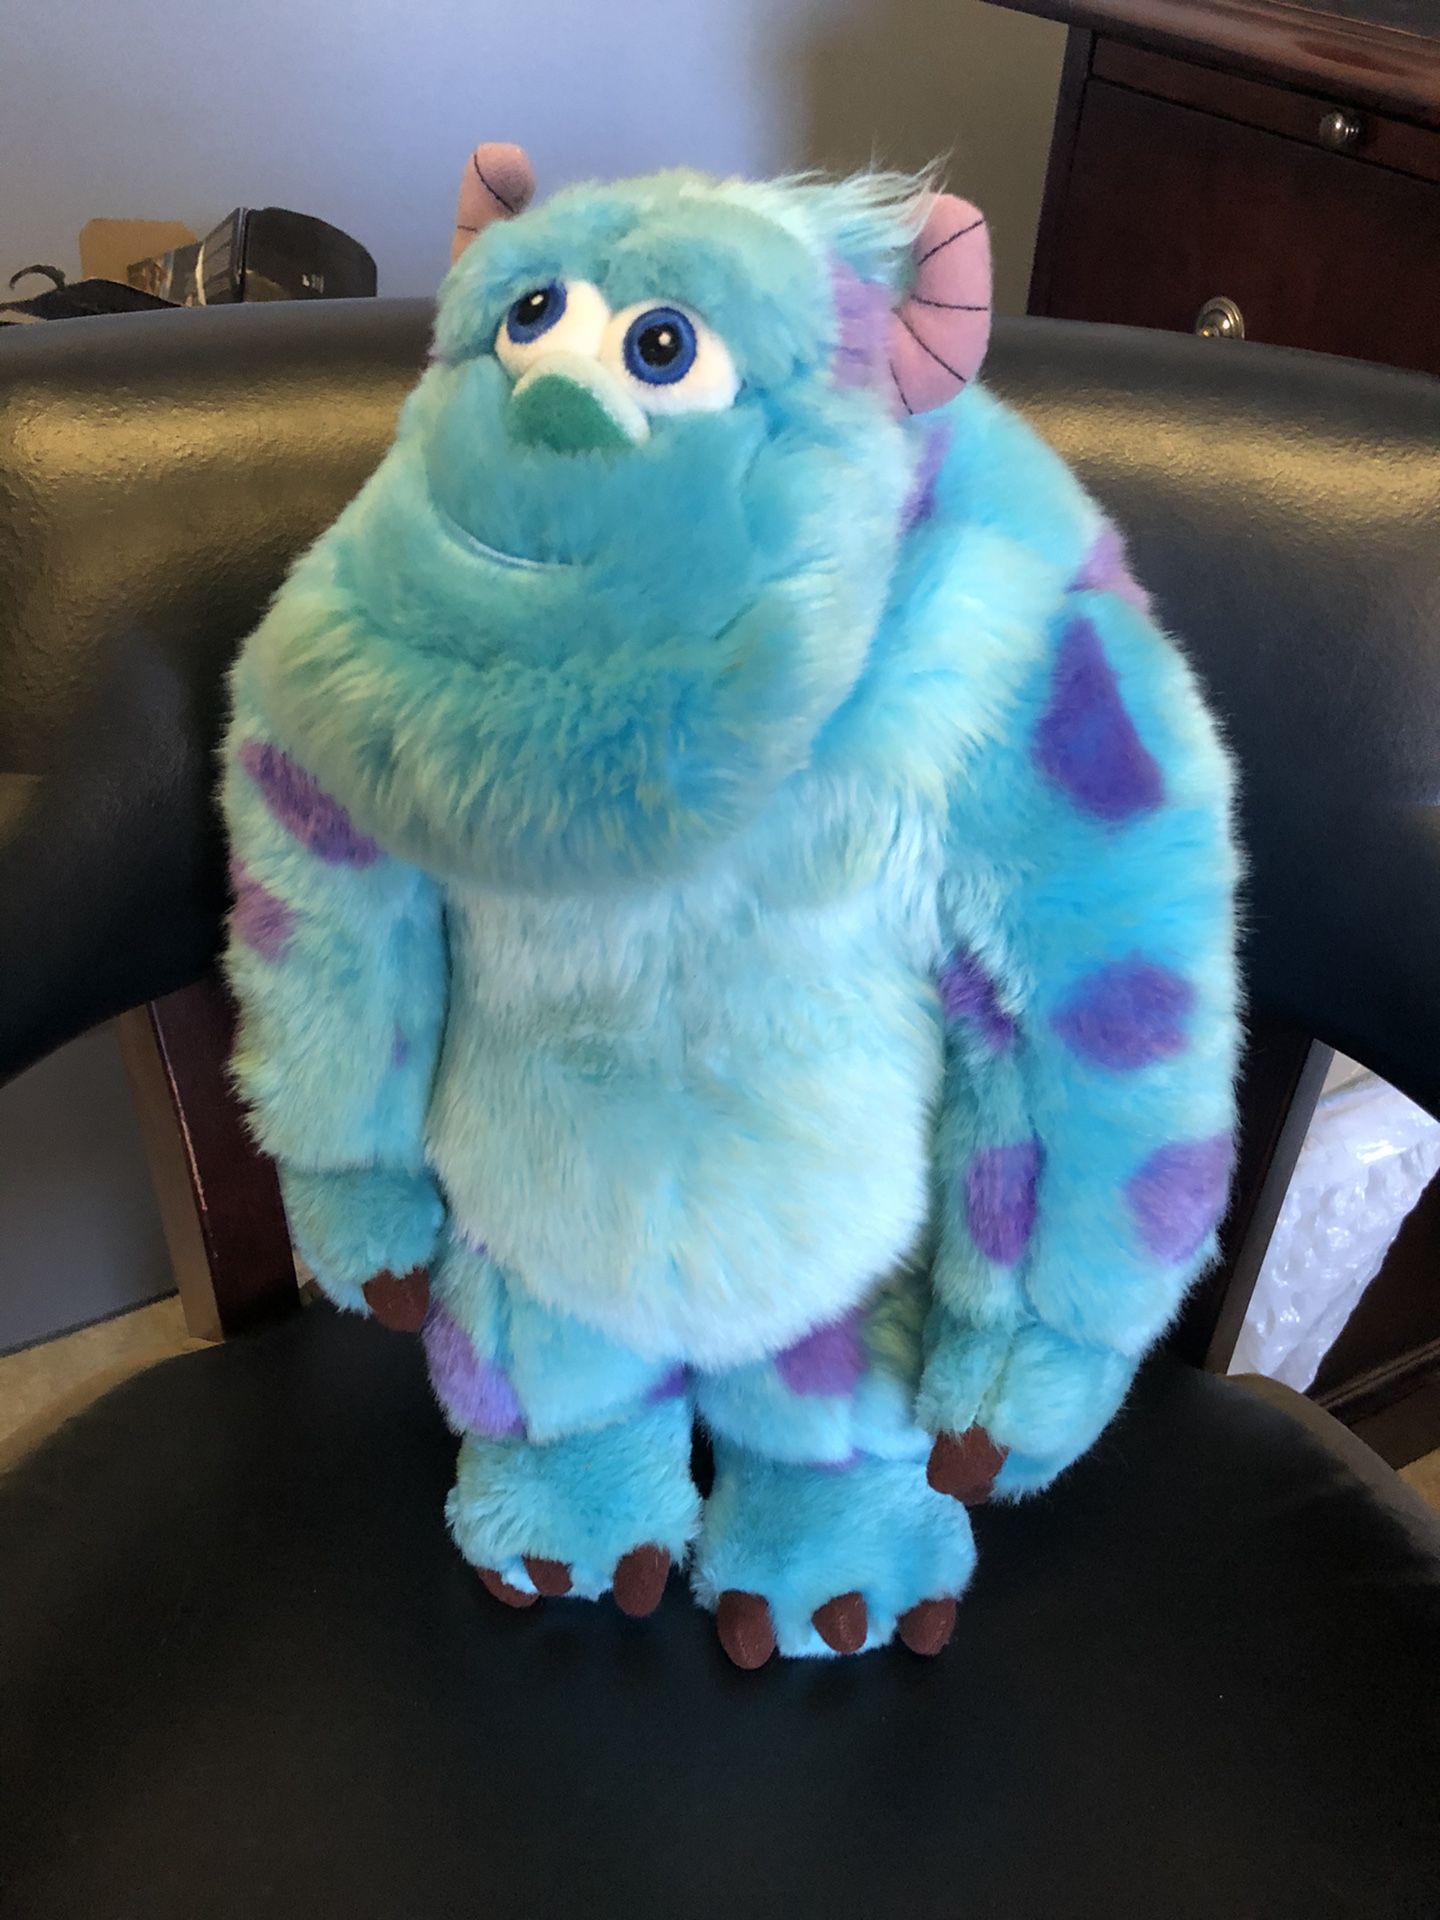 Disney’s Monsters Inc Sully Stuffed animal - about 16” tall